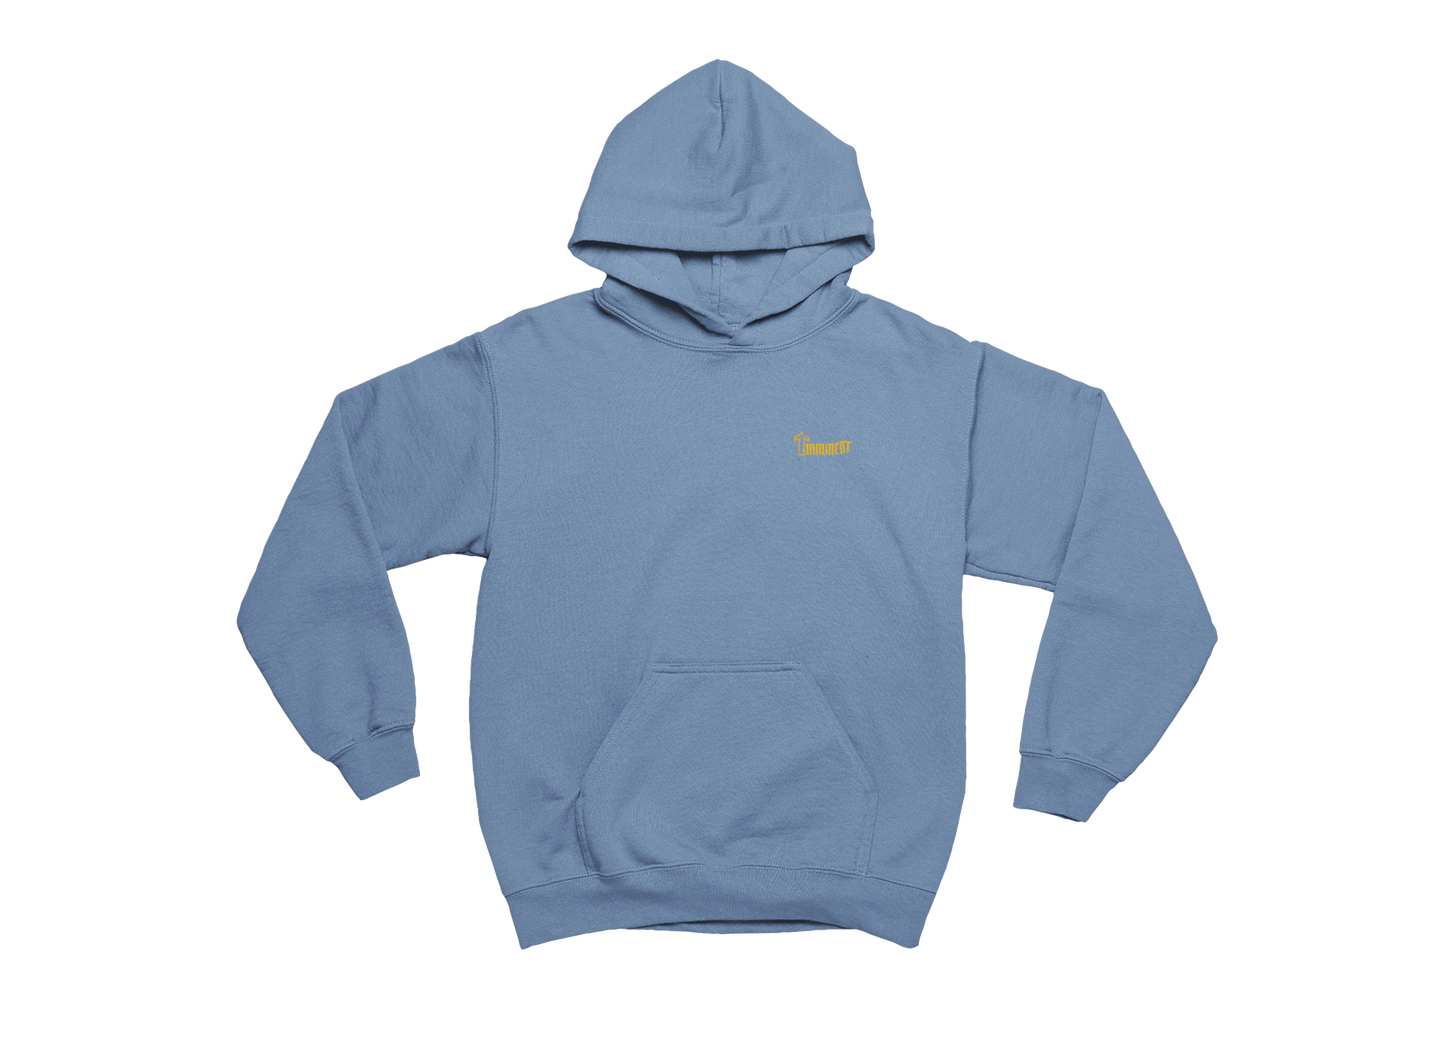 Change The Game Hoodie - Sky Blue/Yellow Gold/Silver [30]